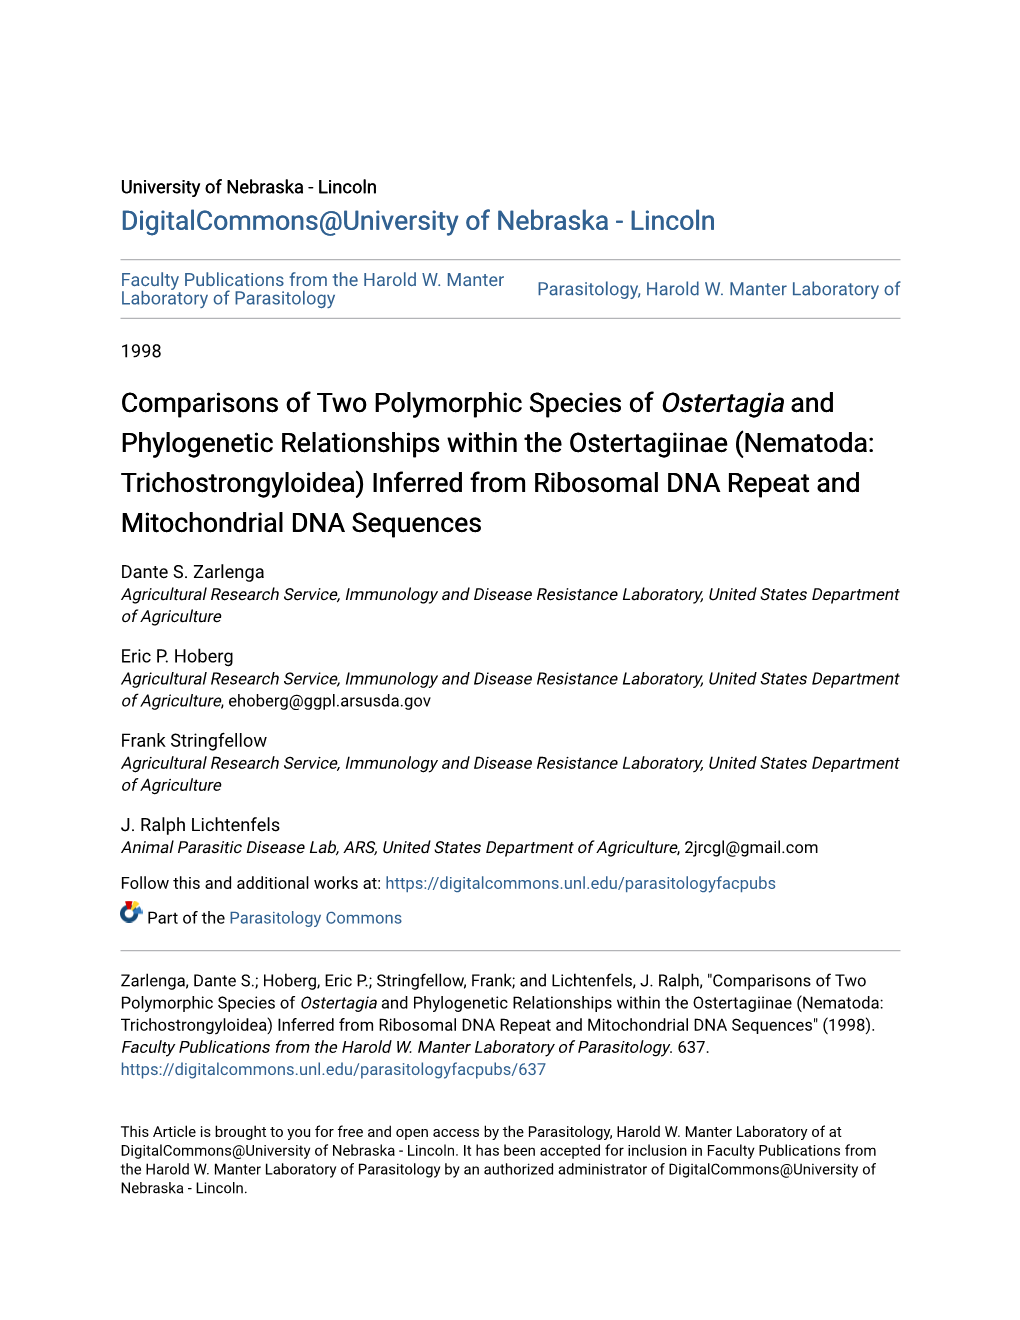 Comparisons of Two Polymorphic Species of Ostertagia And